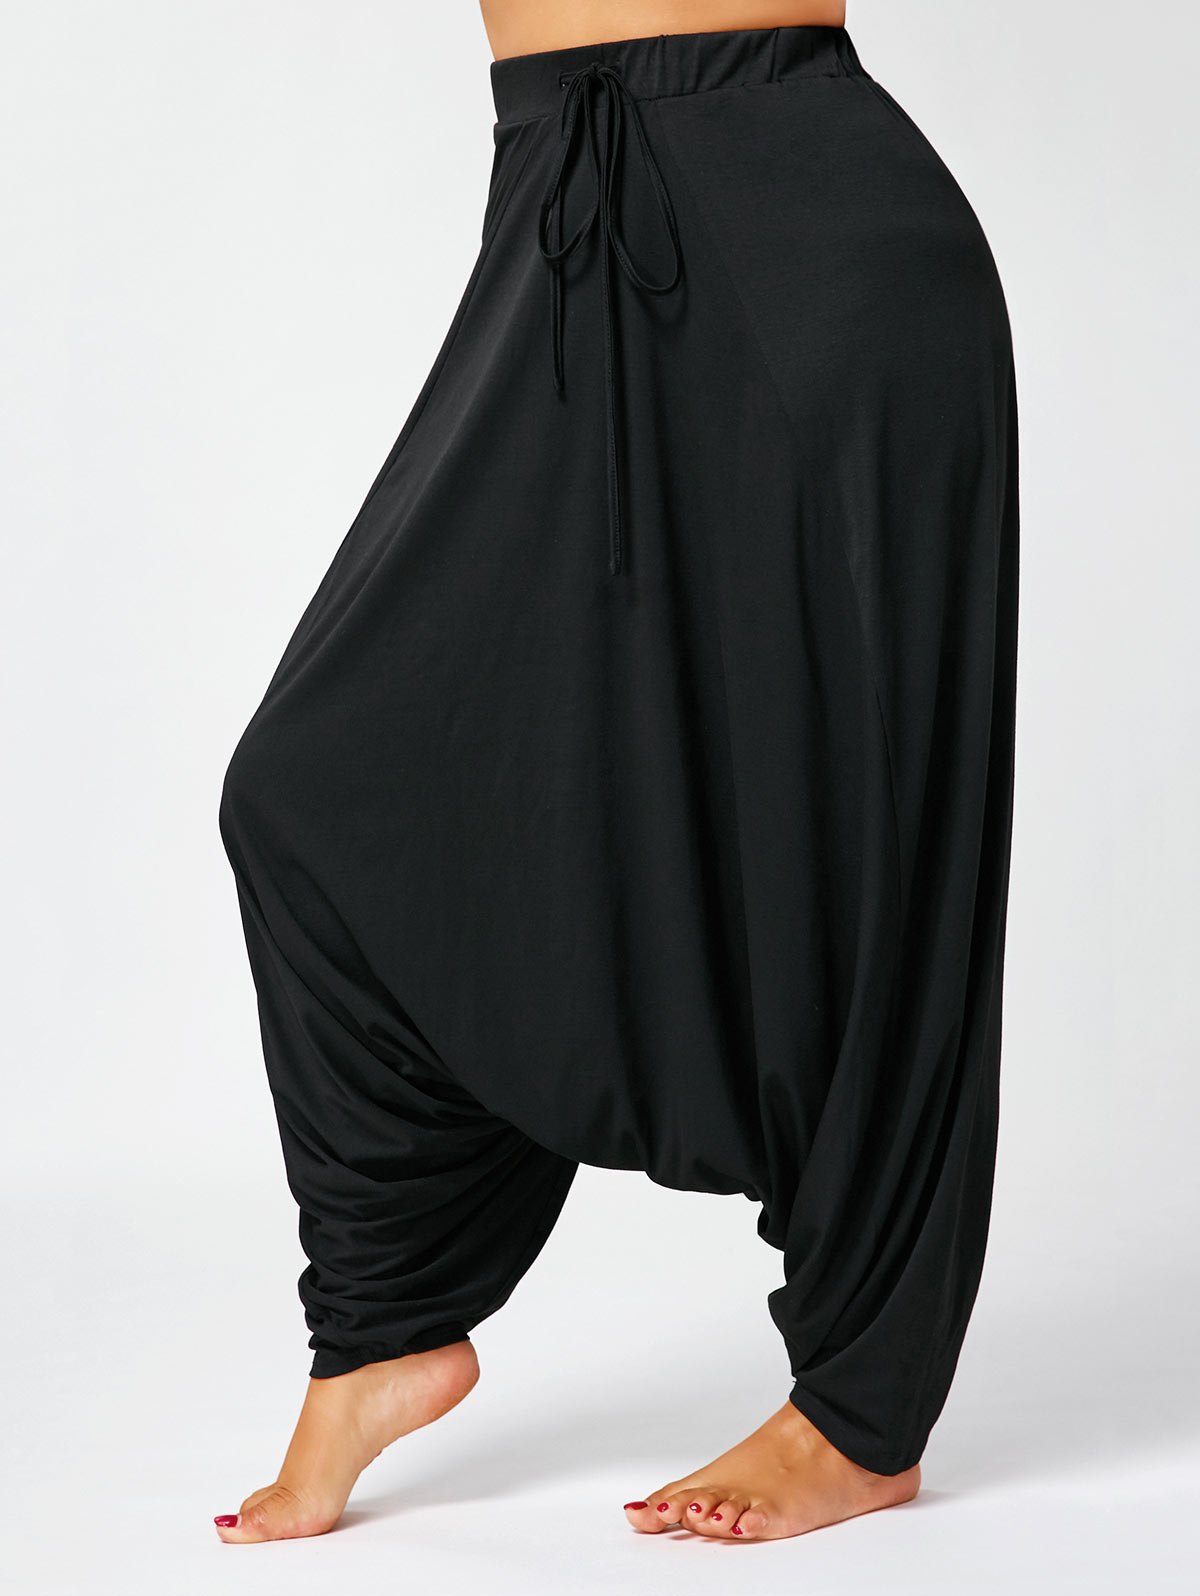 Buy Black Harem Pants For Women- Rayon Online @ ₹399 from ShopClues